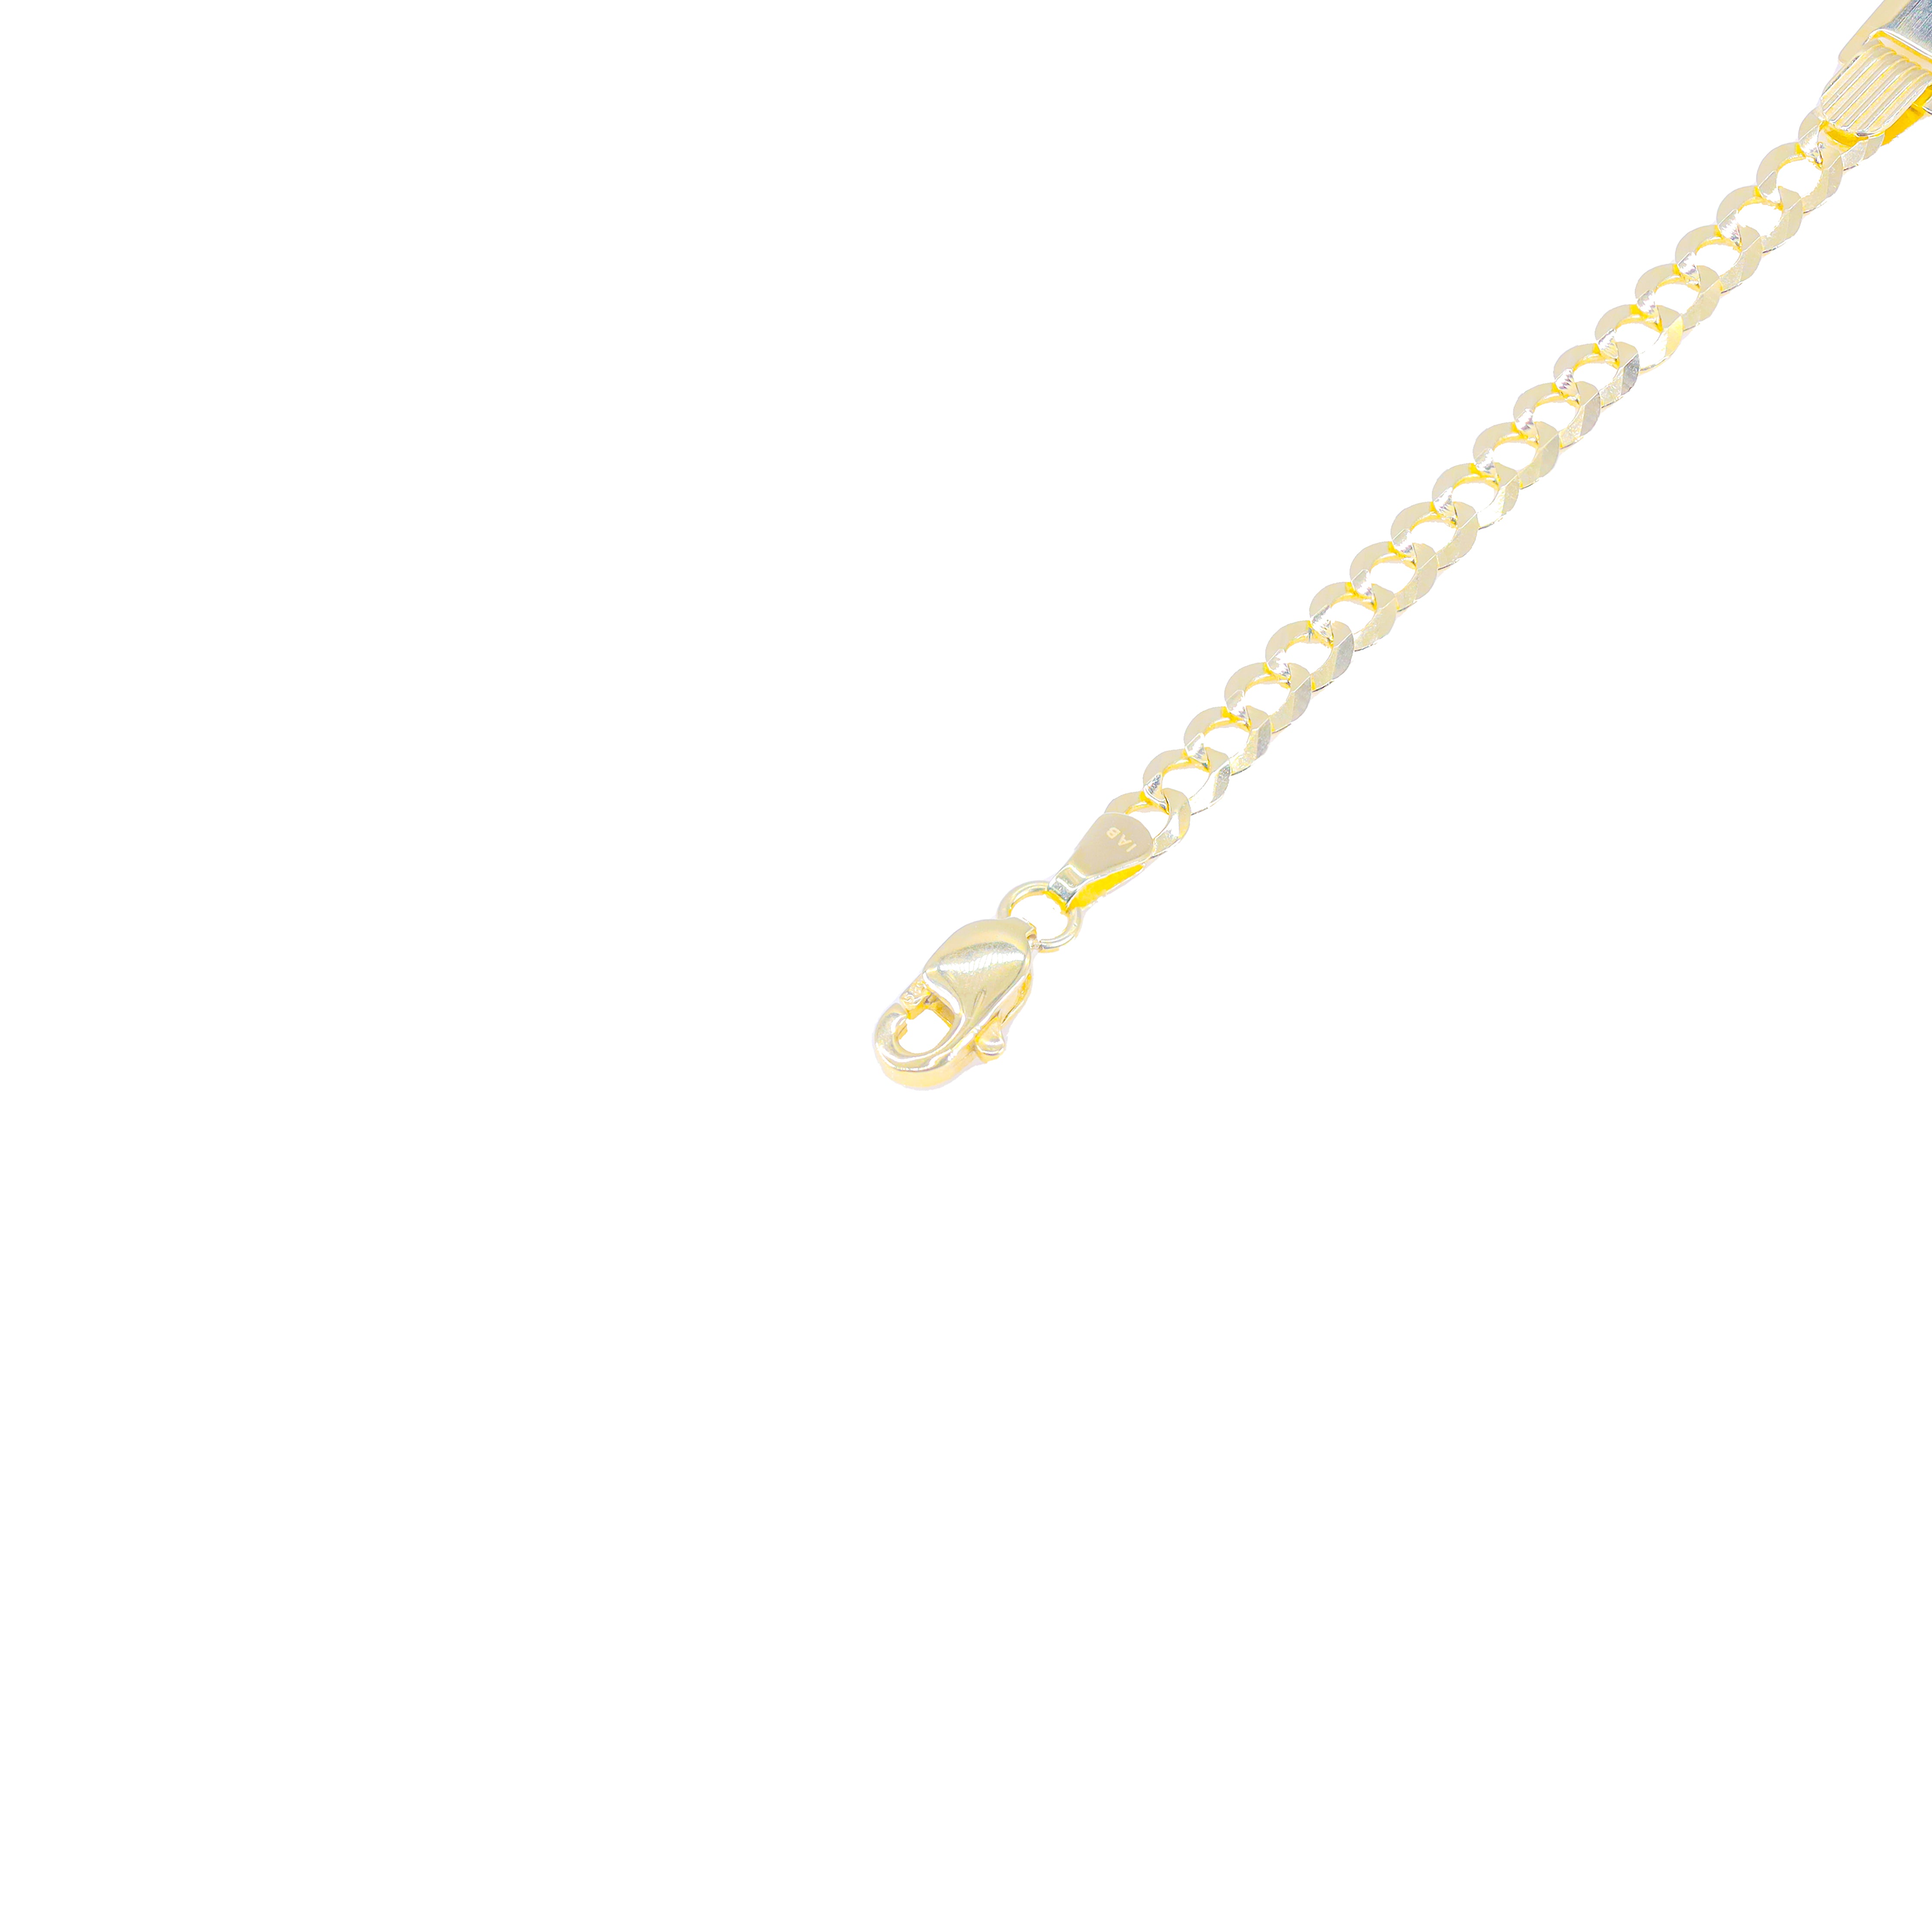 14KT Solid Yellow Gold ID Tag Bracelet